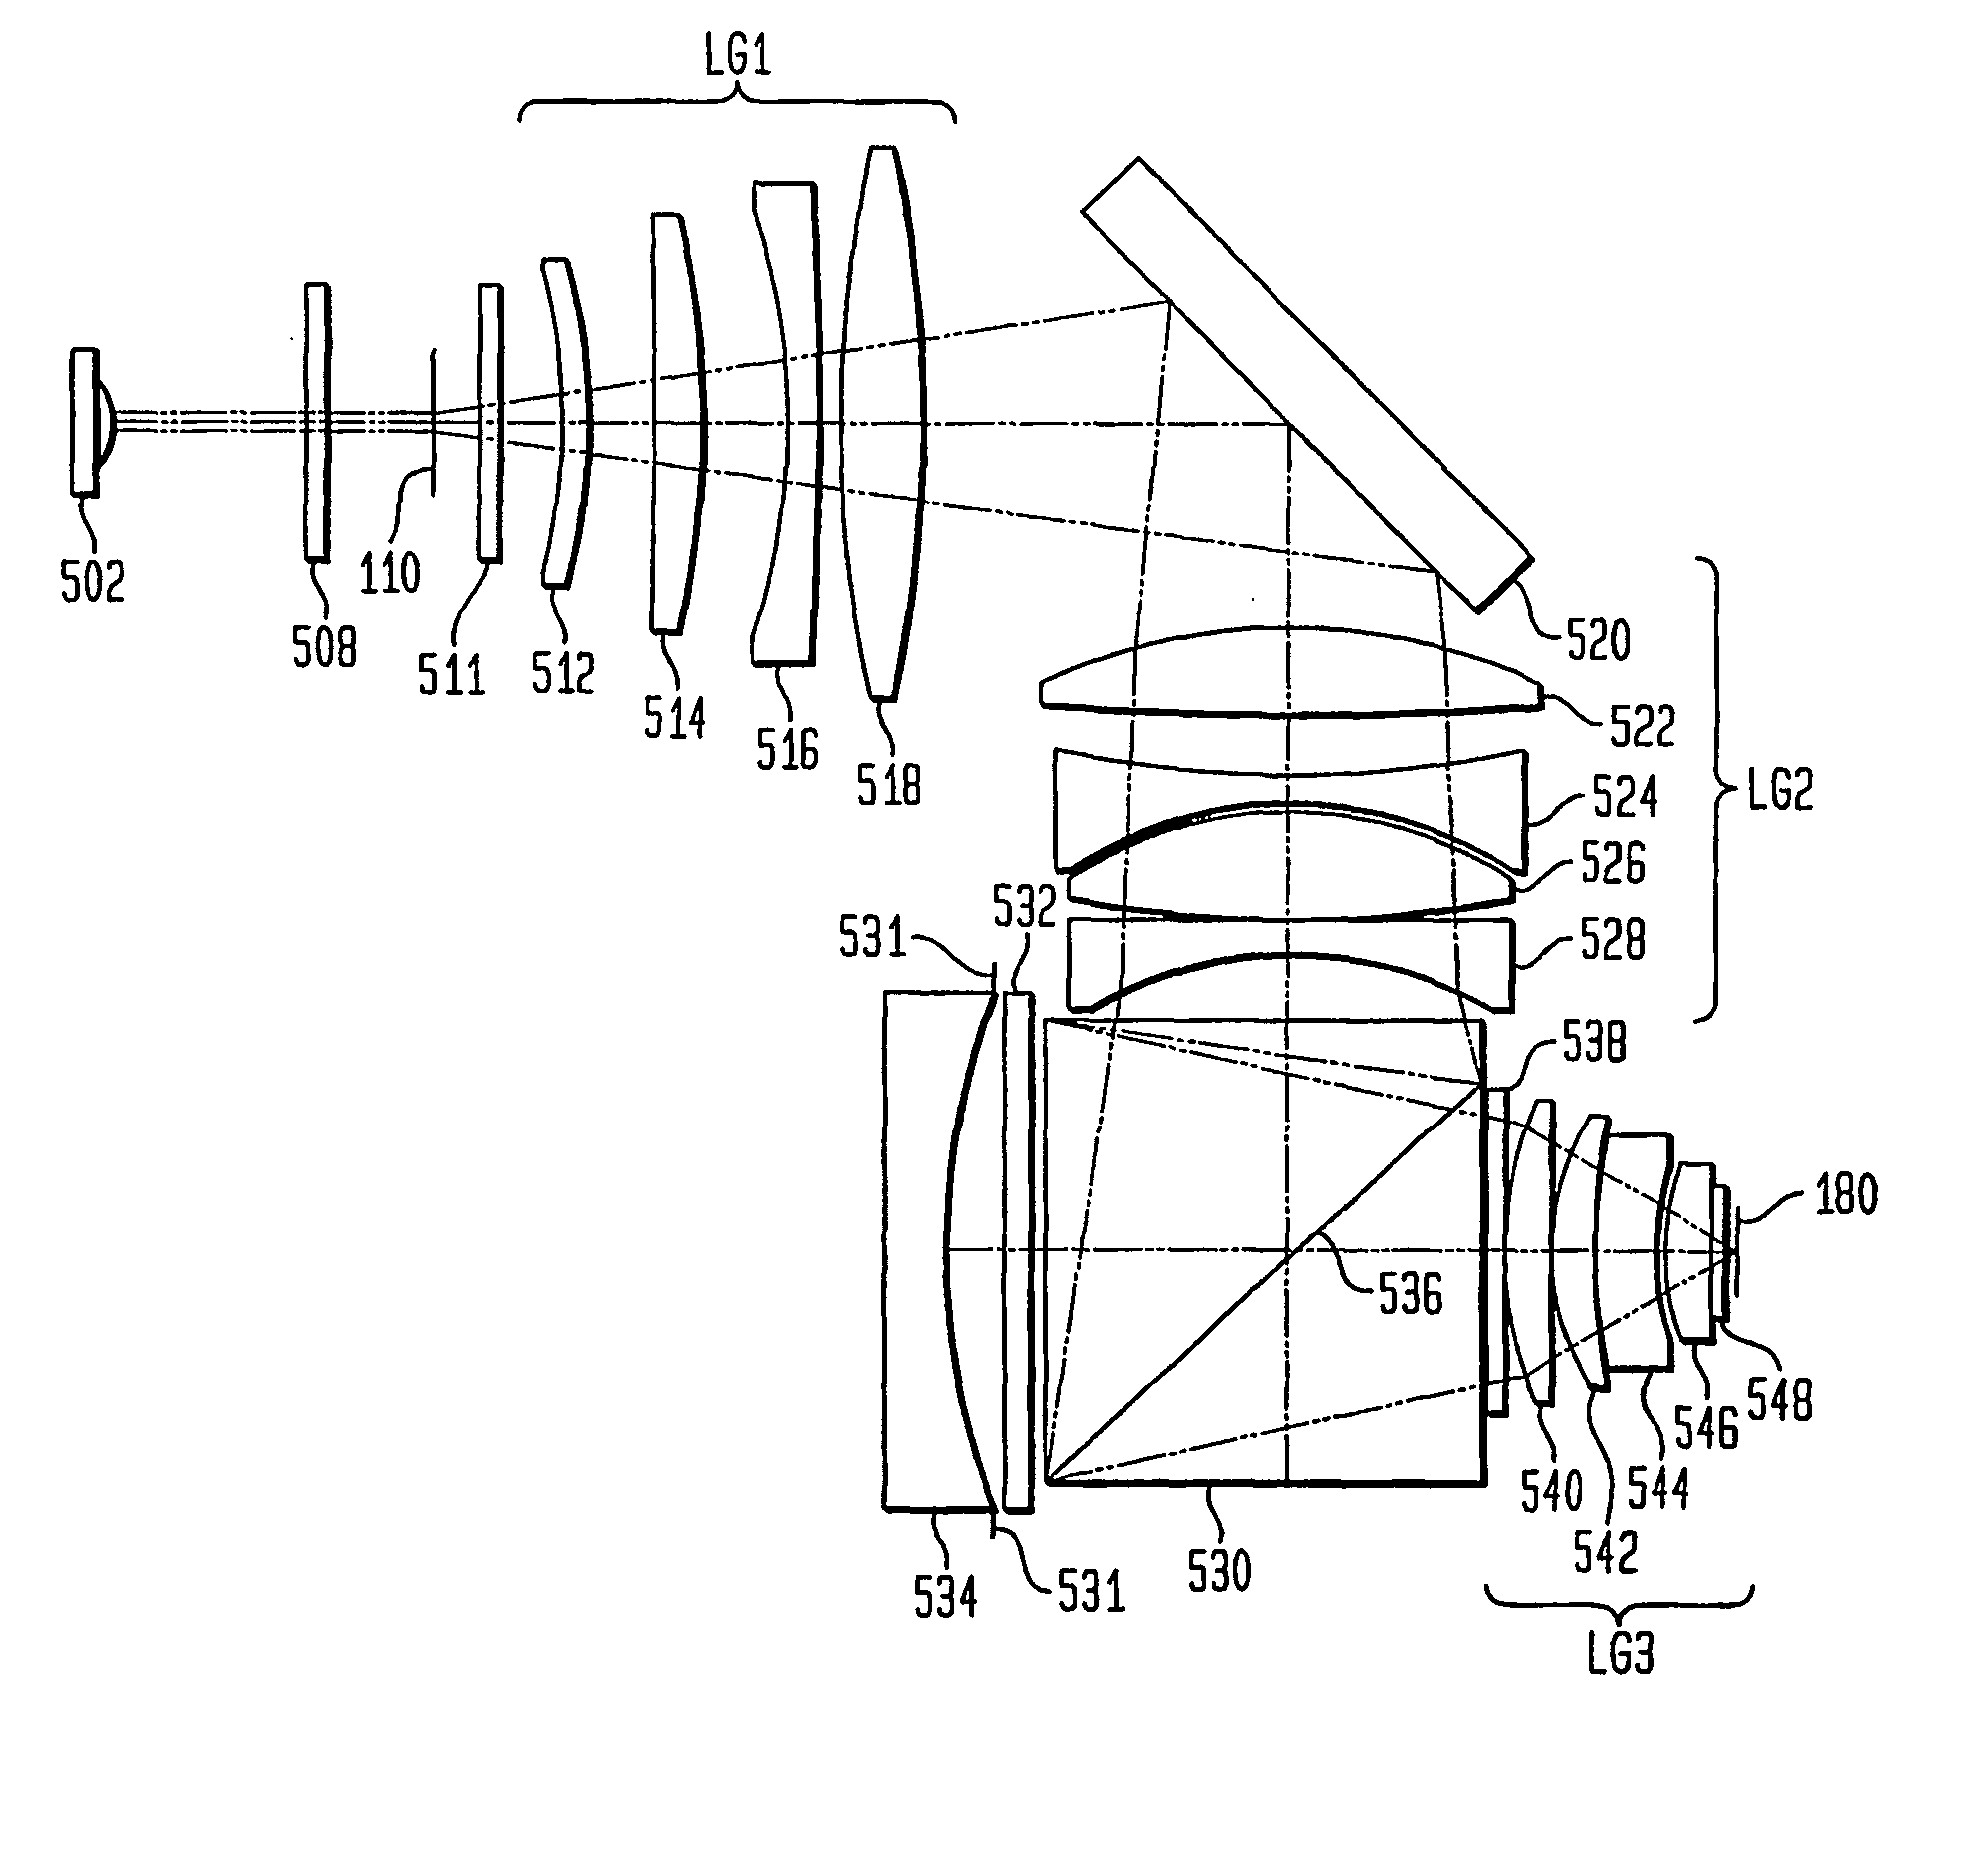 Optical reduction system with elimination of reticle diffraction induced bias